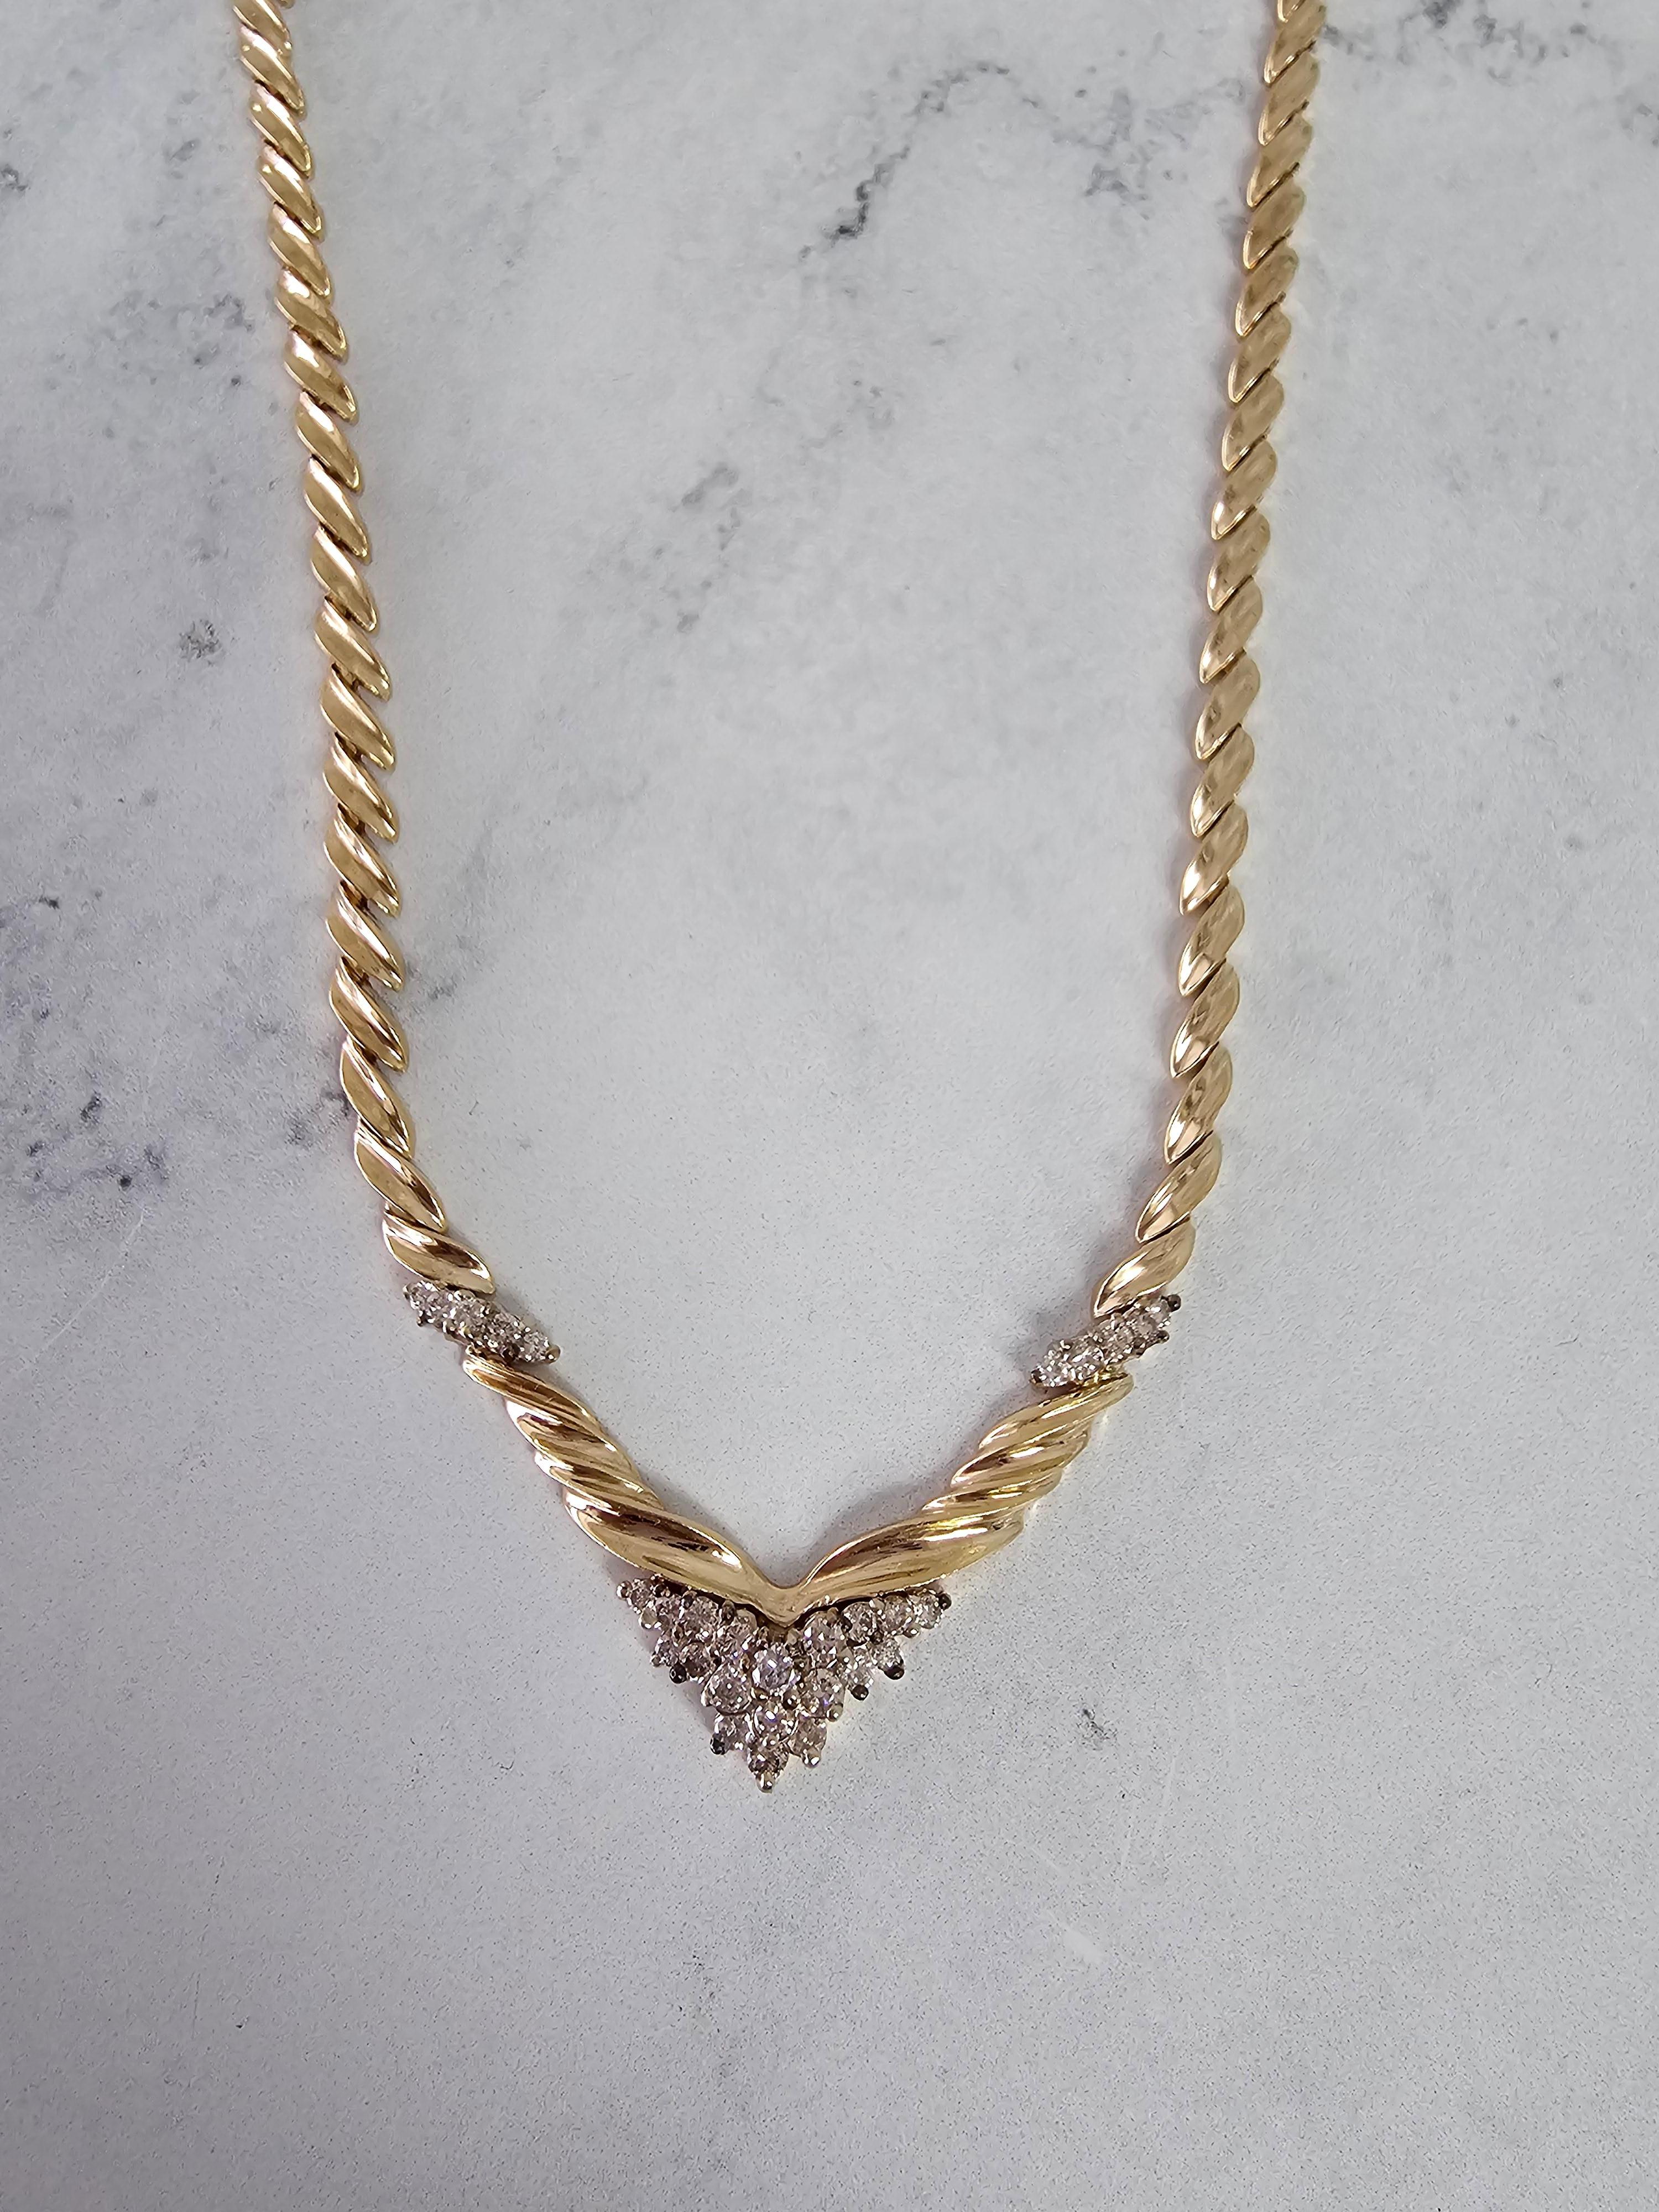 Round Cut 'V' Shaped Two-Toned Diamond Vintage Style Necklace 1.00cttw 14k Yellow Gold For Sale